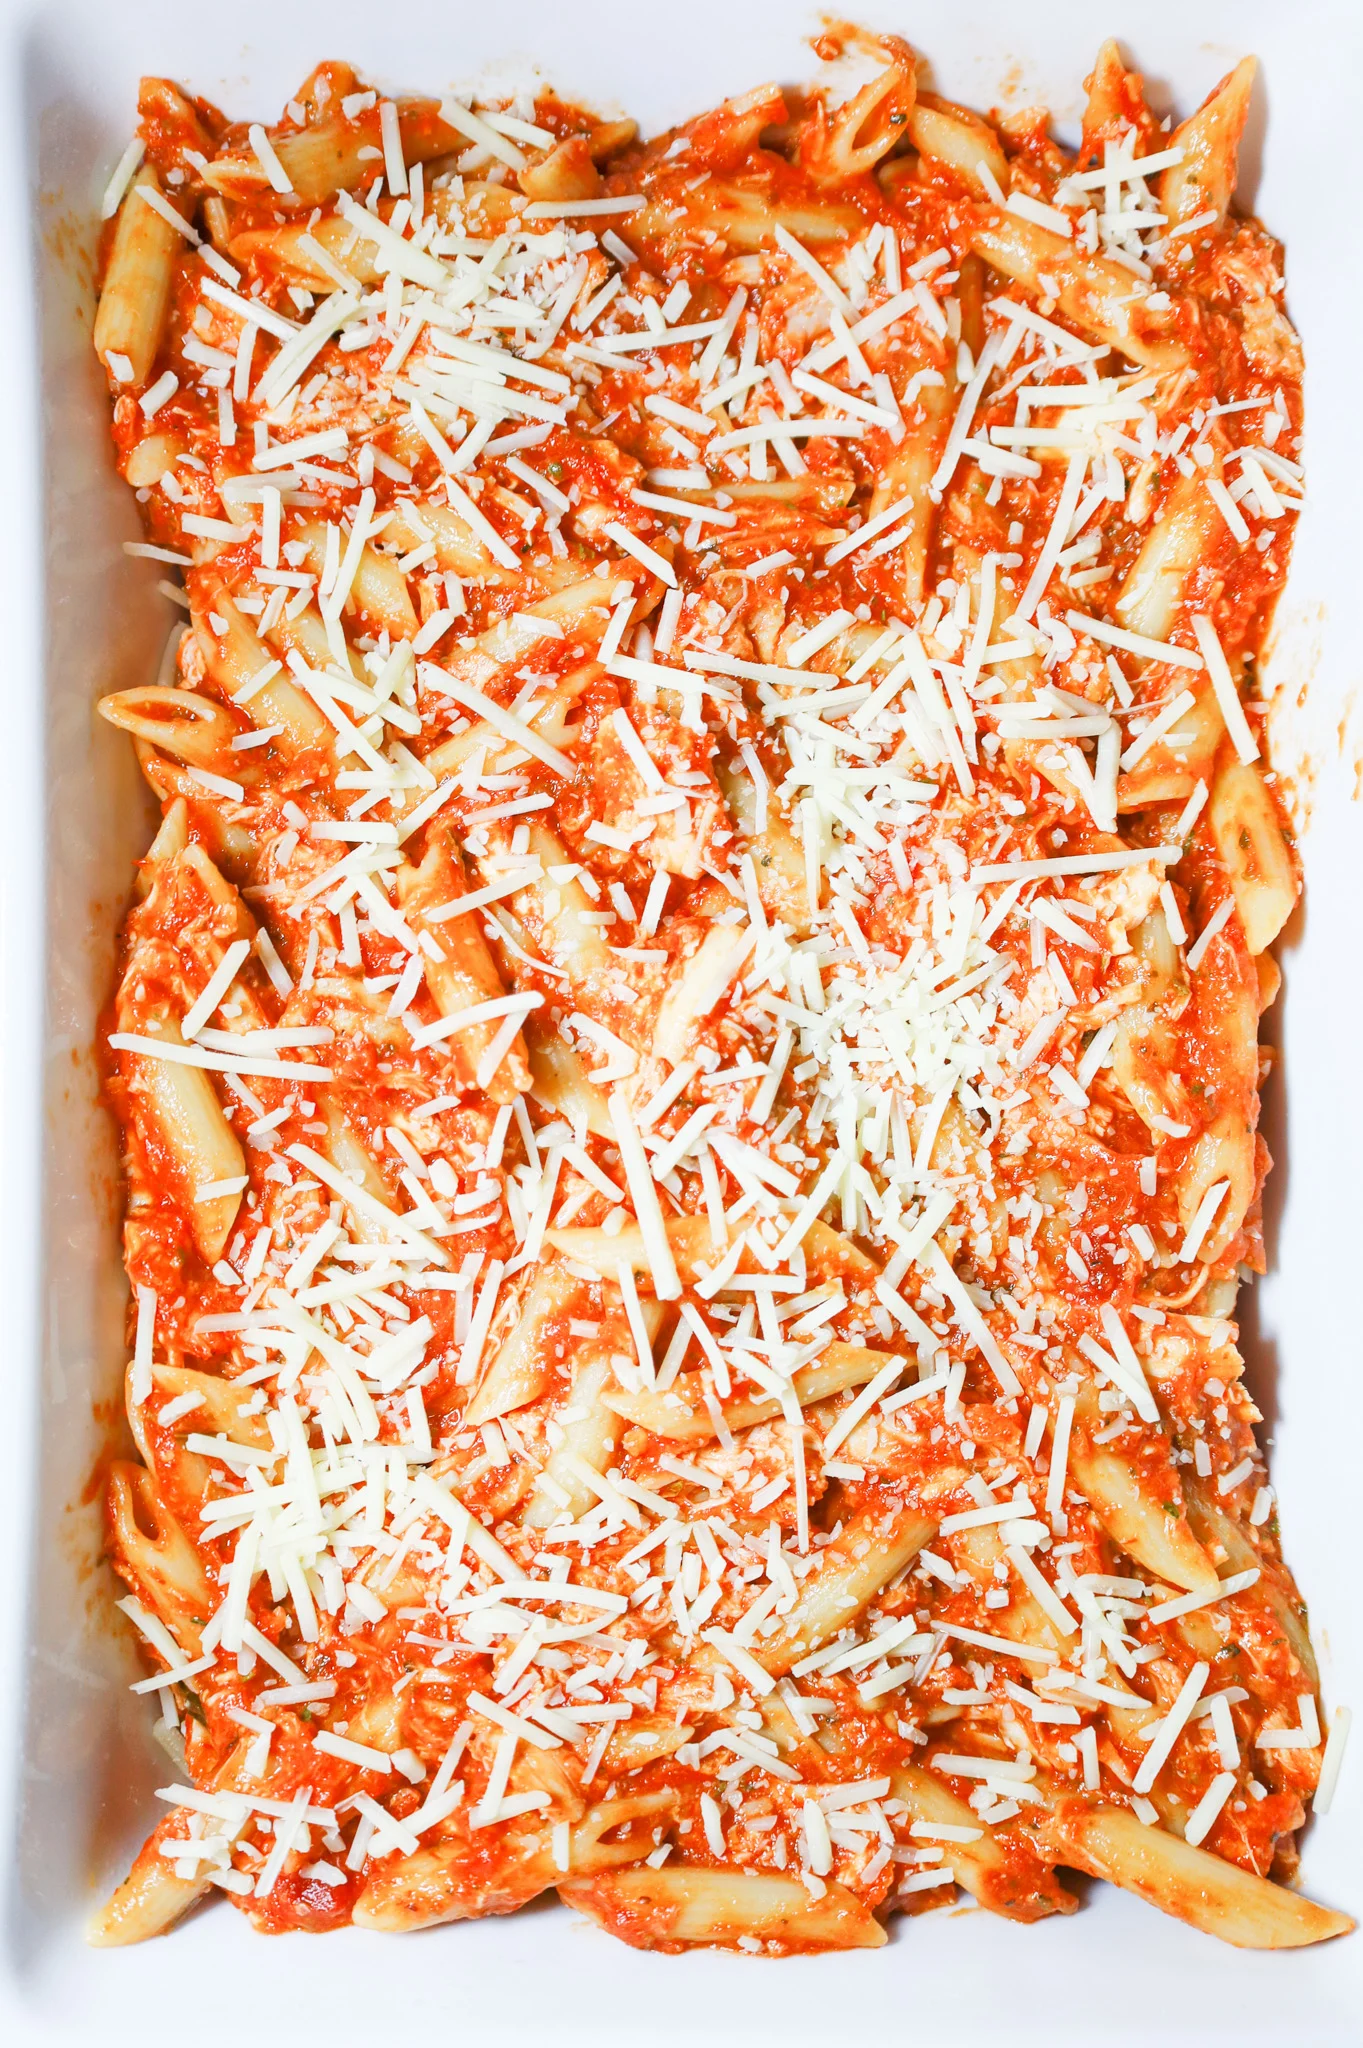 shredded parmesan cheese on top of penne marinara in a baking dish